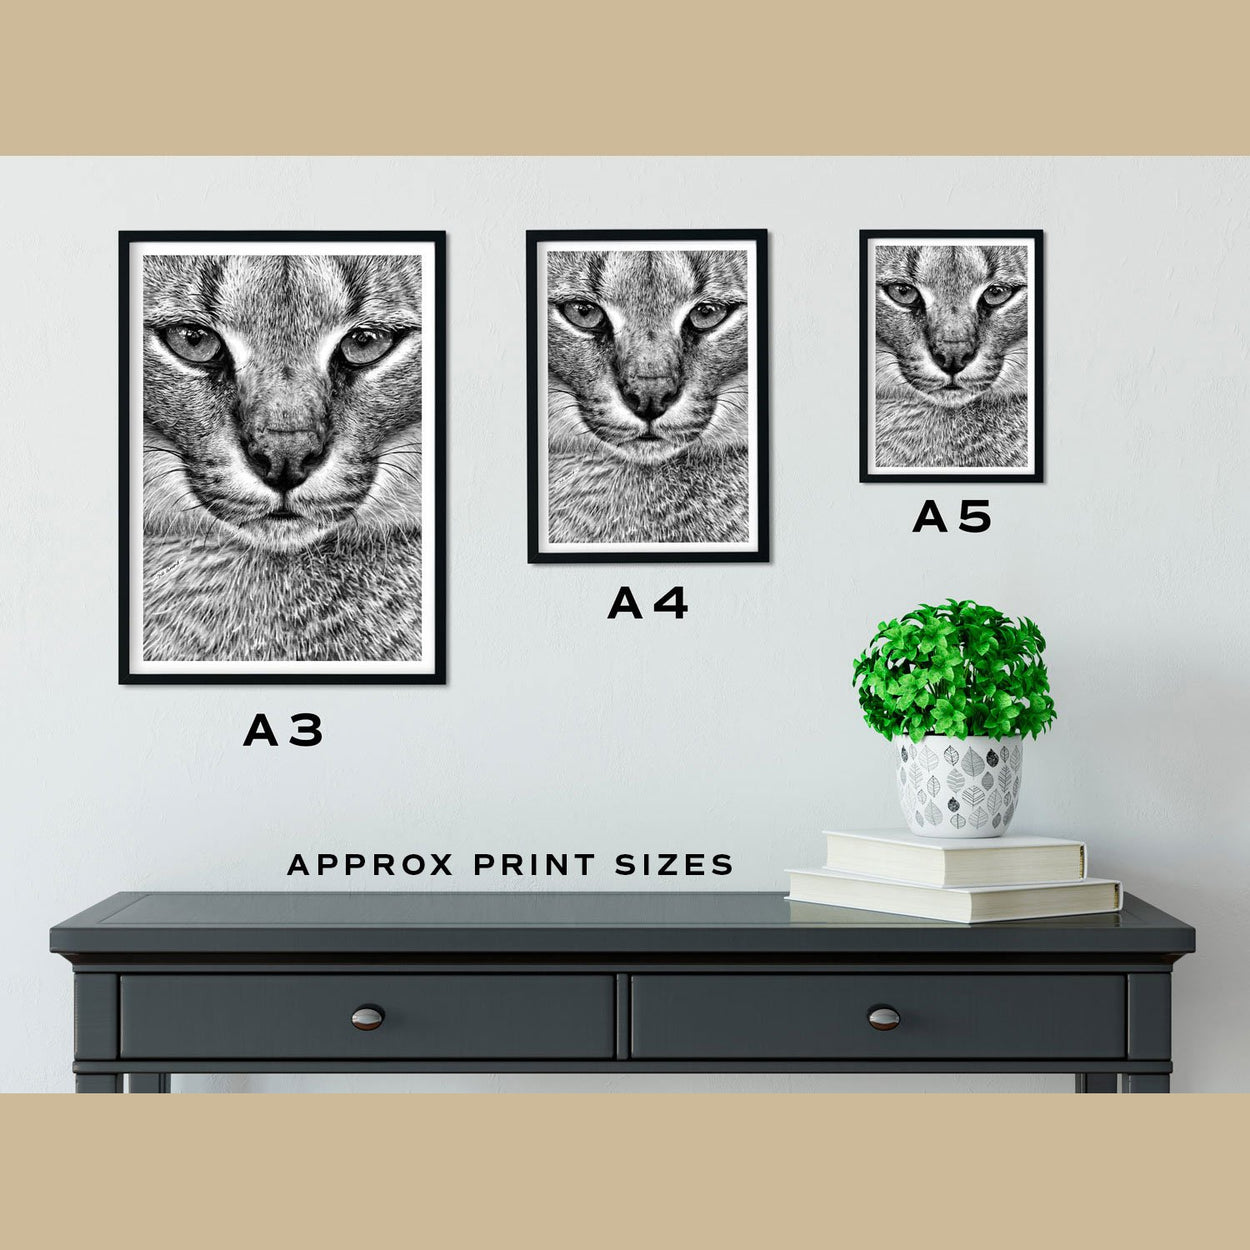 Caracal Prints Size Comparison - The Thriving Wild.jpg